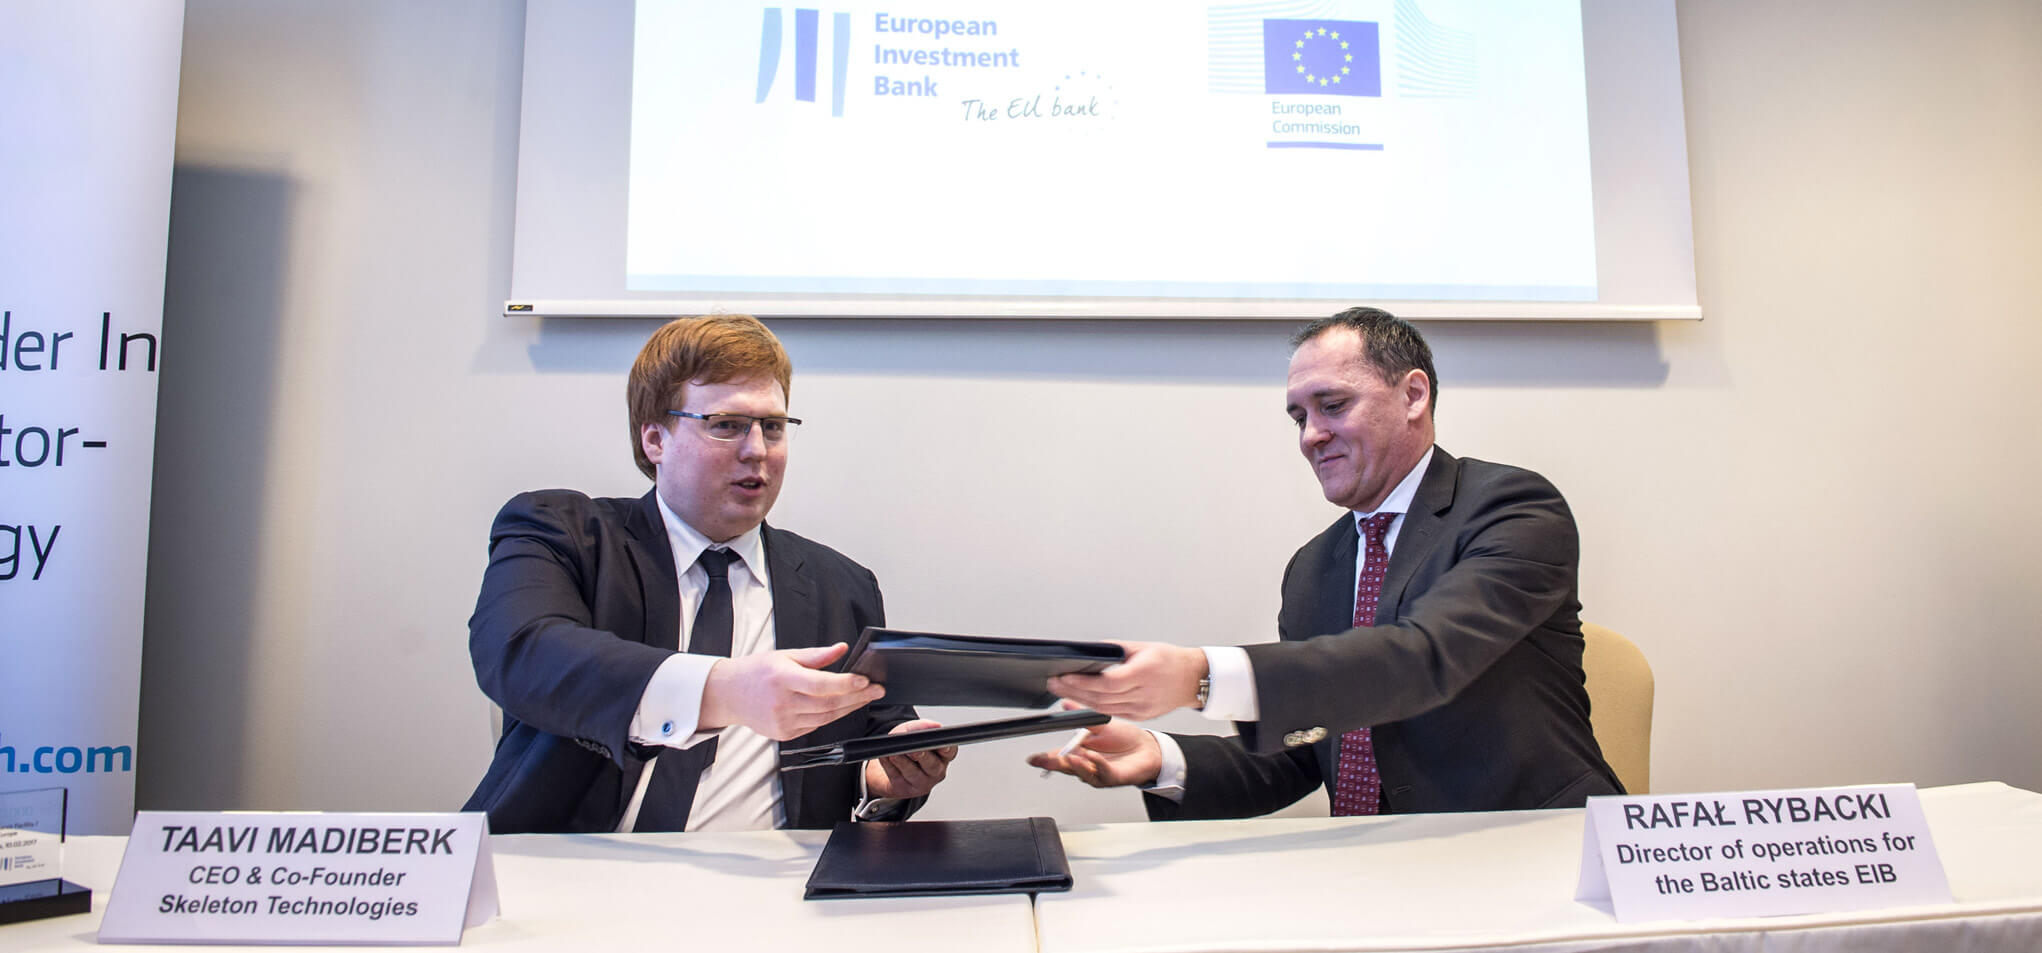 European Investment Bank signed an agreement